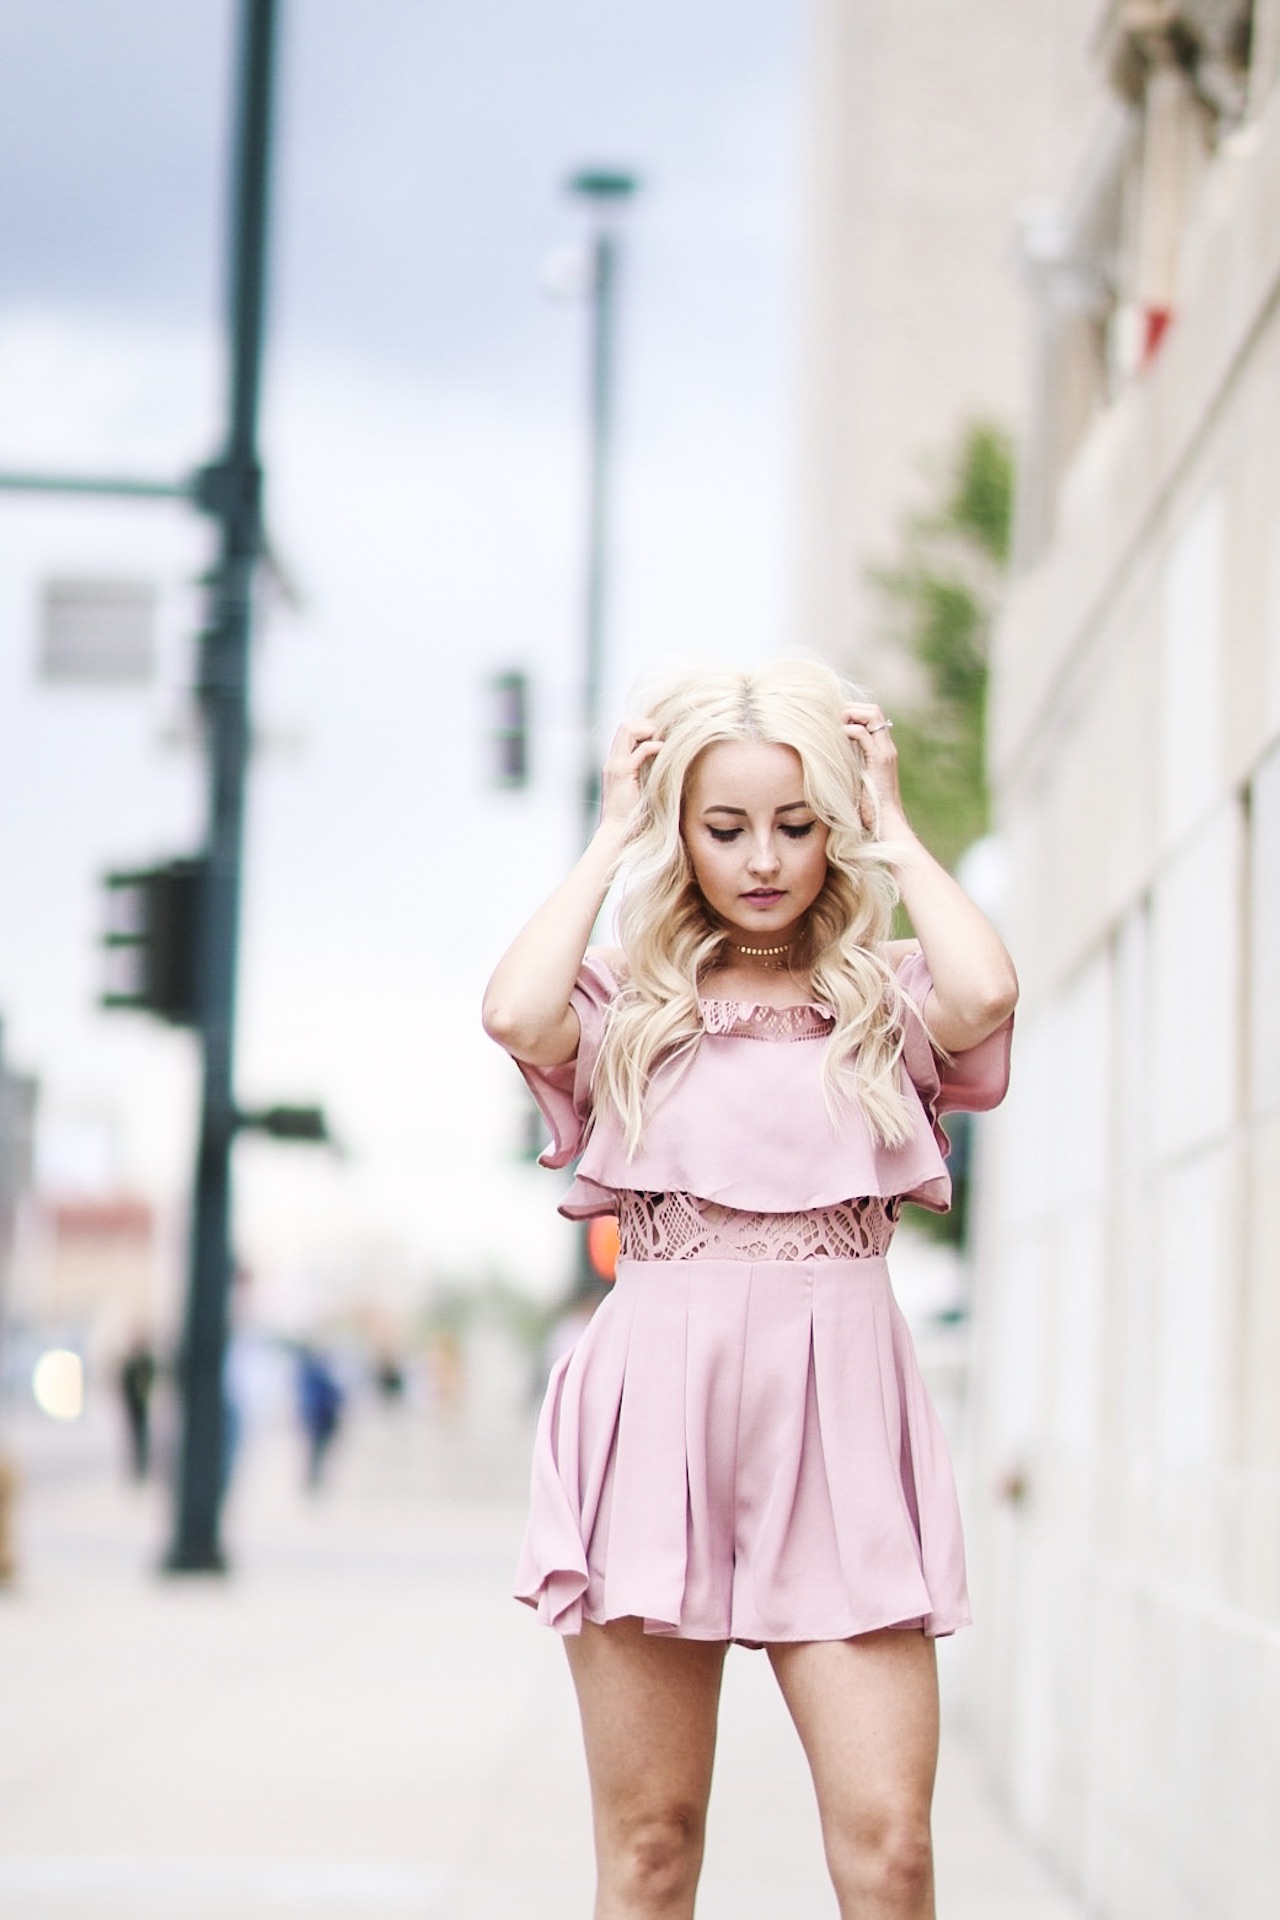 Alena Gidenko of modaprints.com styles a pink lace romper for Summer